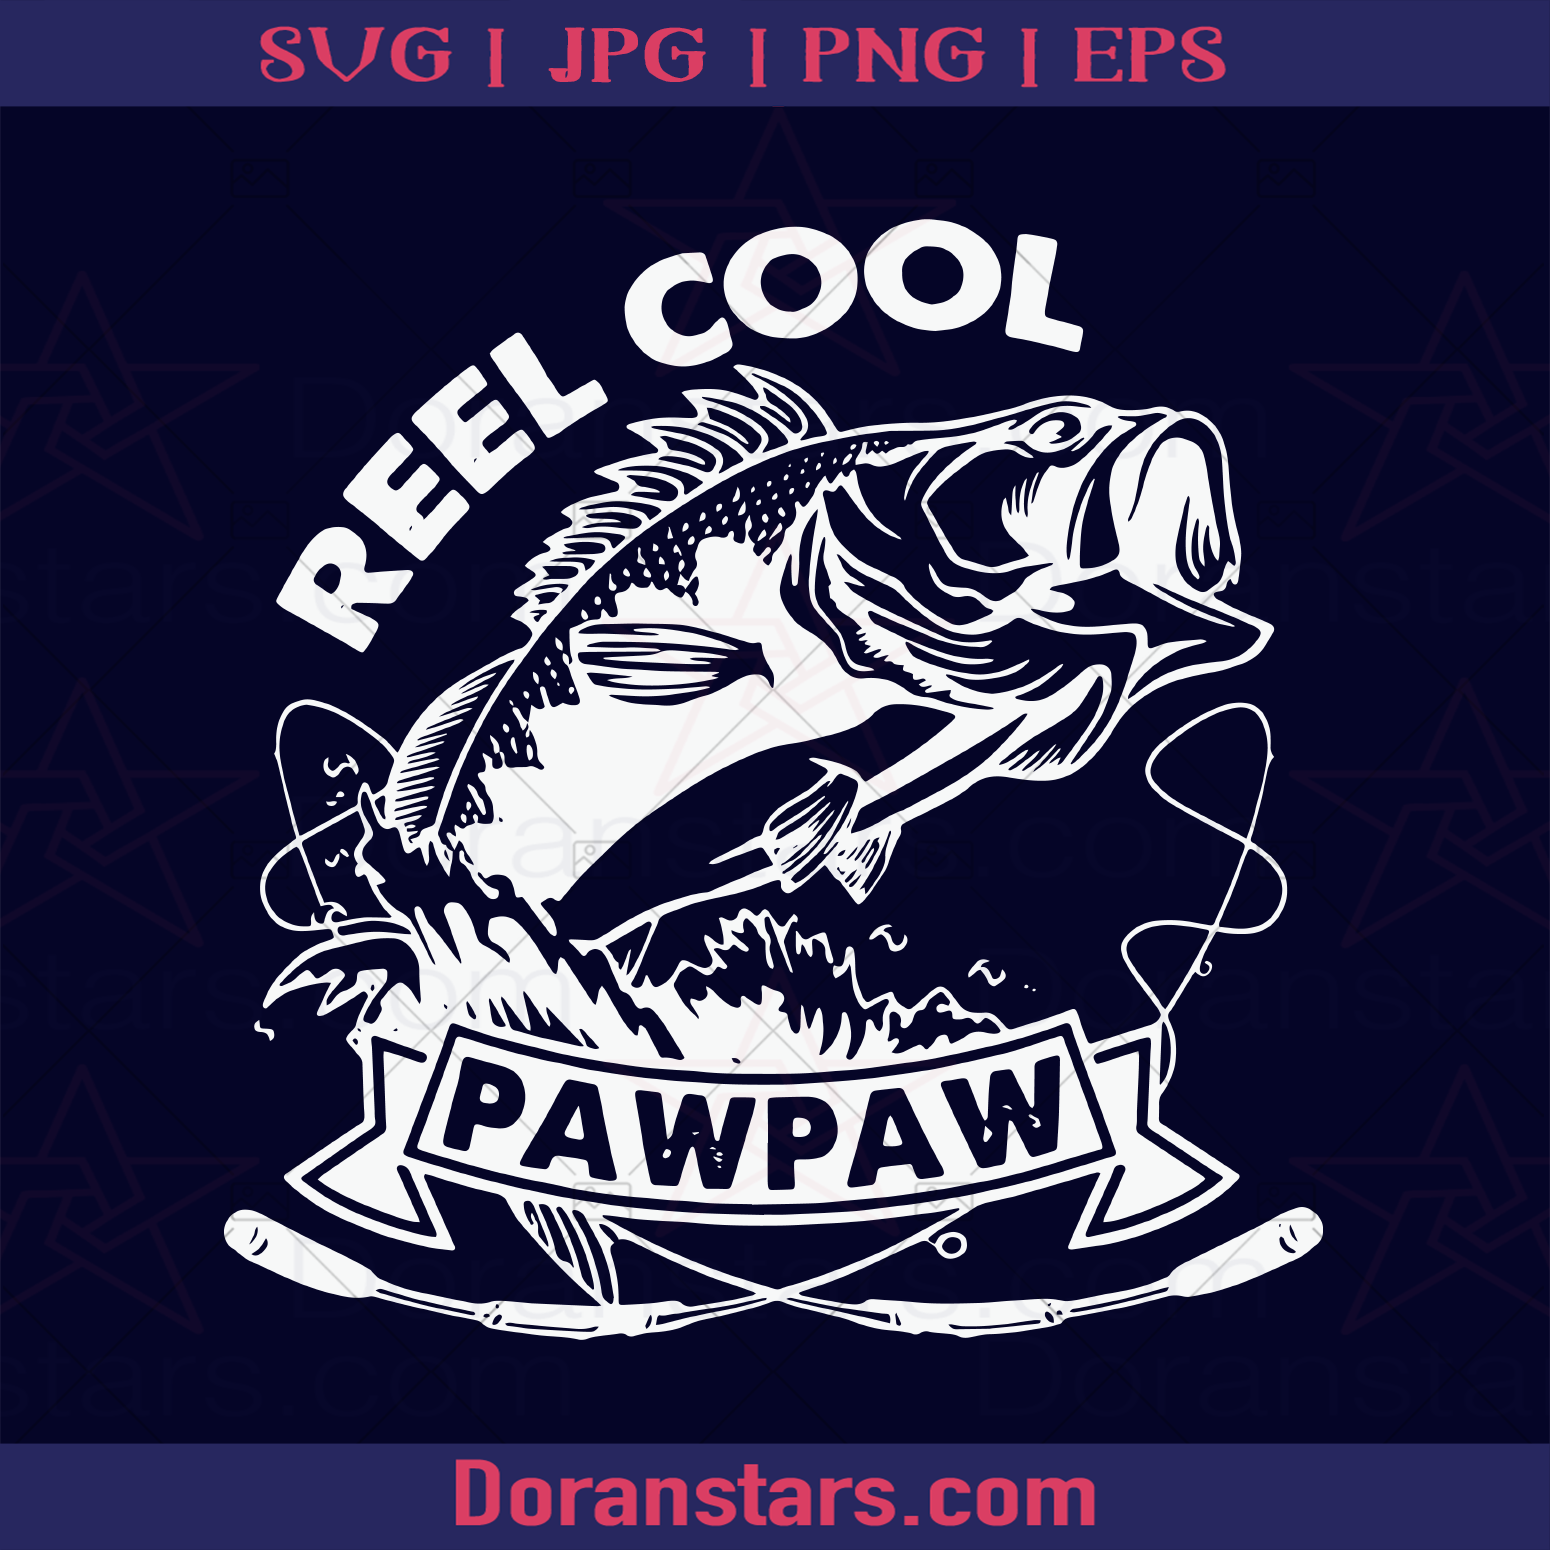 Father's Day Svg Reel Cool Pawpaw logo, Svg Files For Cricut, Dxf, Eps,  Png, Cricut Vector, Digital Cut Files Download -  - DoranStars